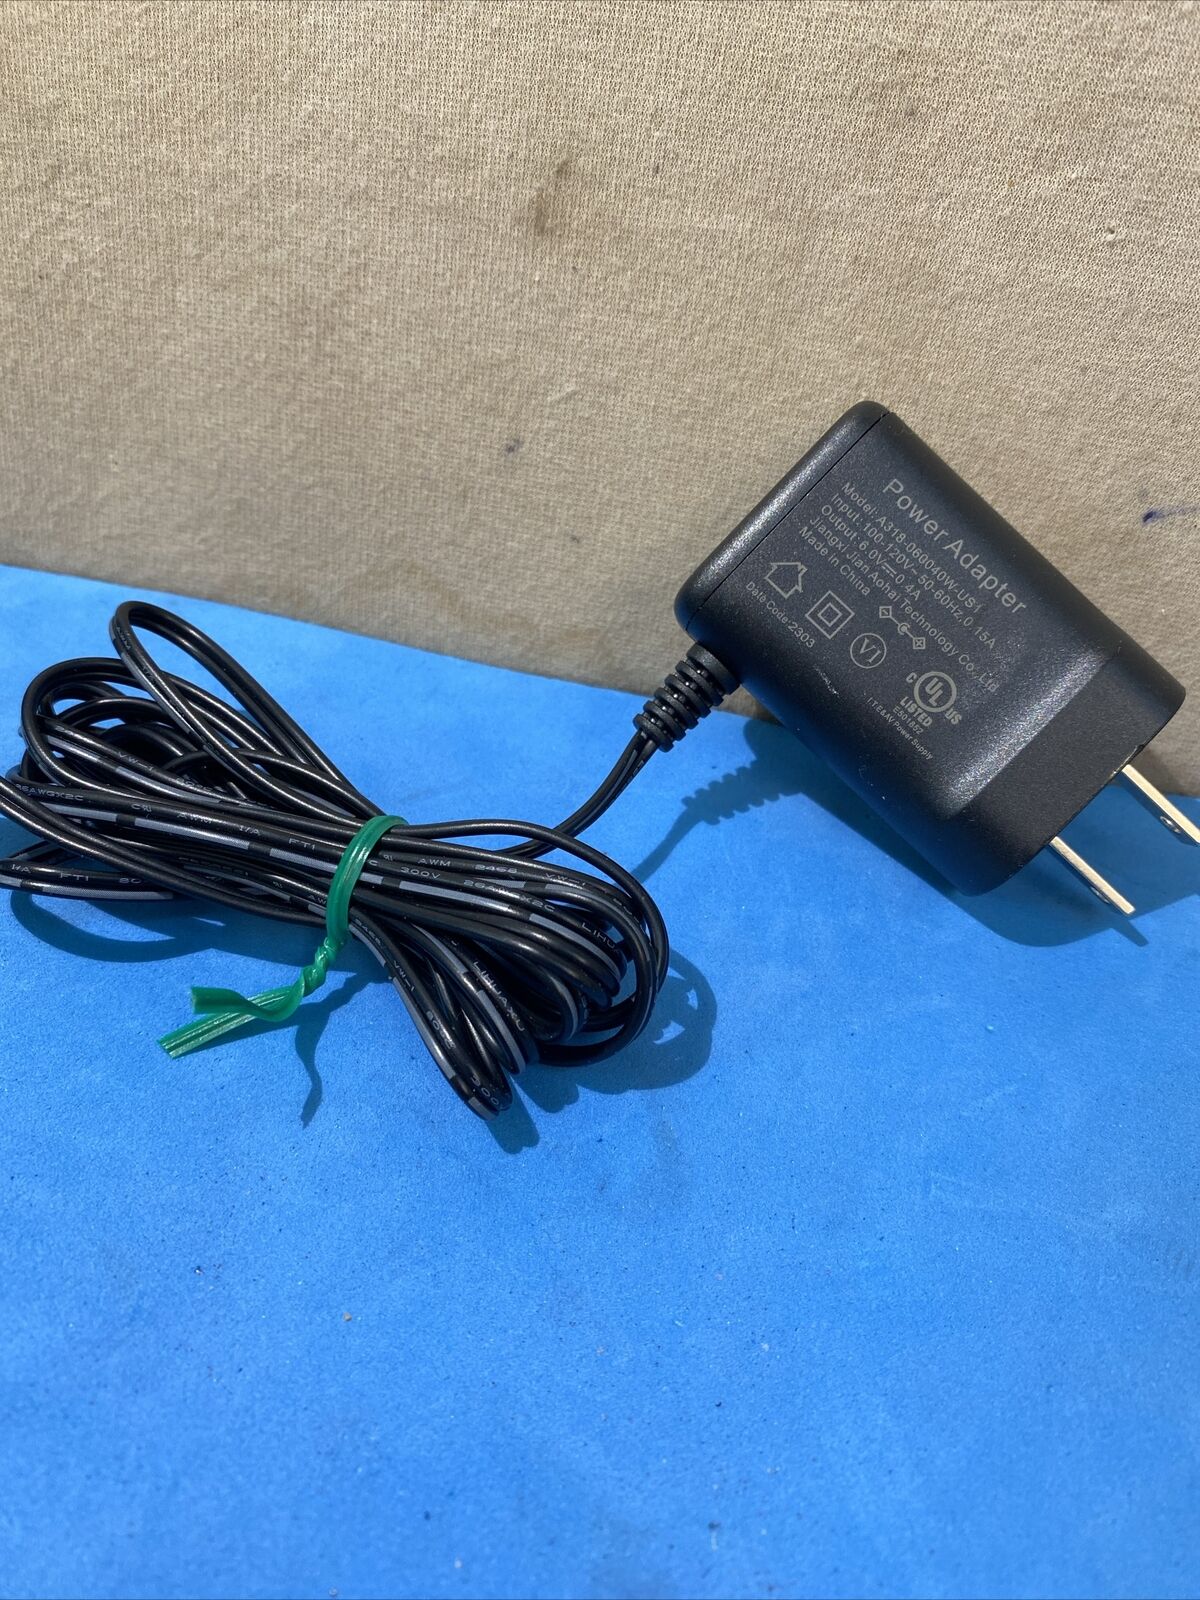 6V AC DC Adapter for Vtech A318-060040W-US1 Charging CORD 4 Base Mint Condition